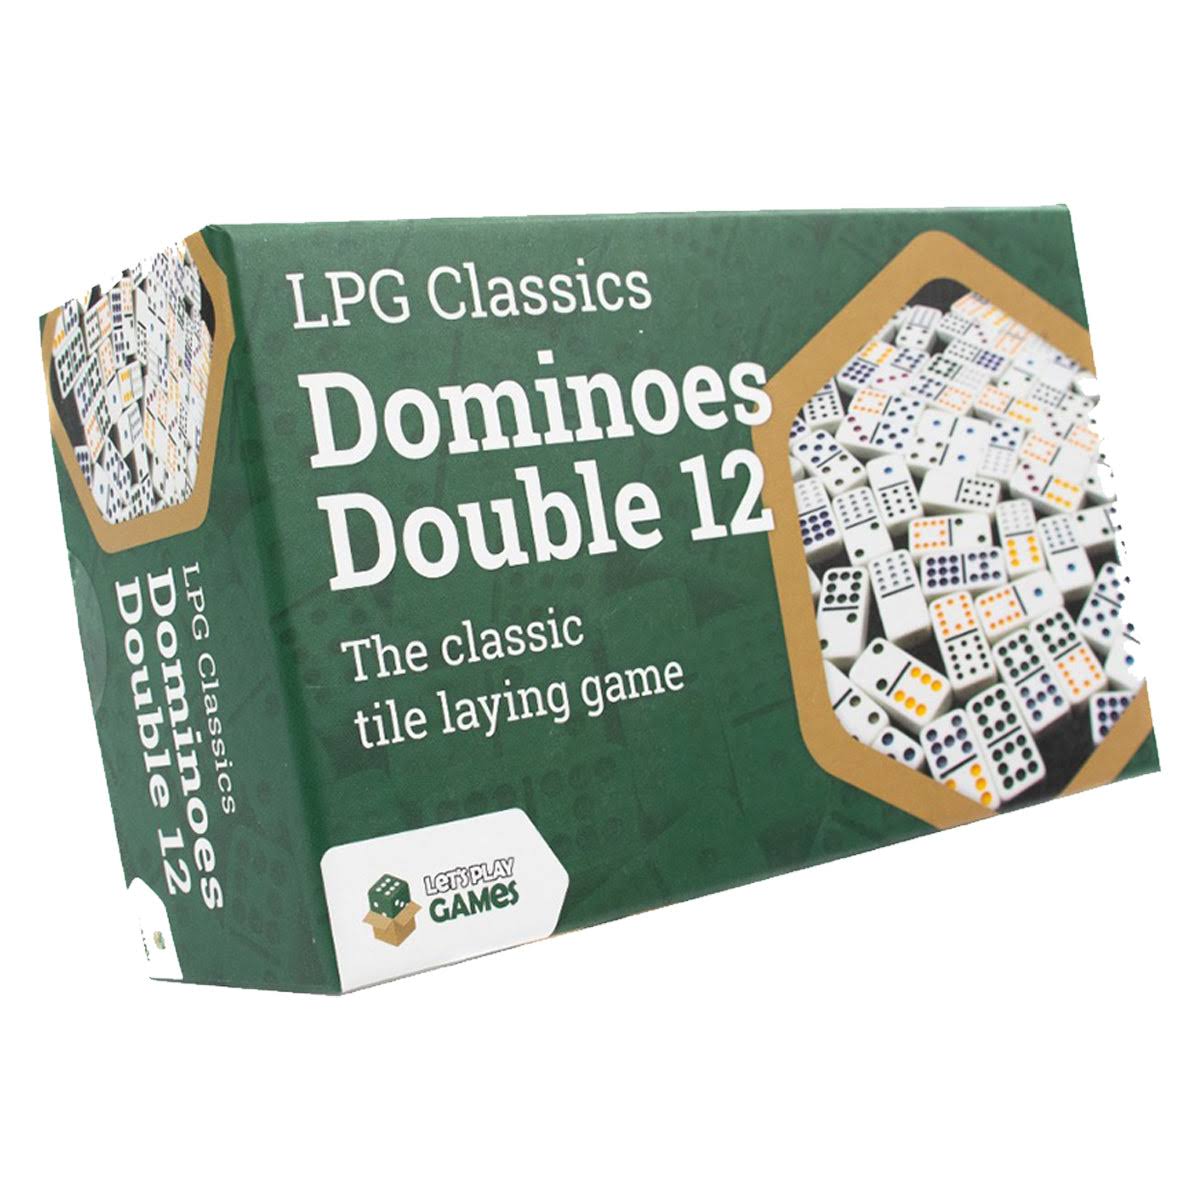 Let's Play Games LPG Classics Dominoes Board Game Double 12